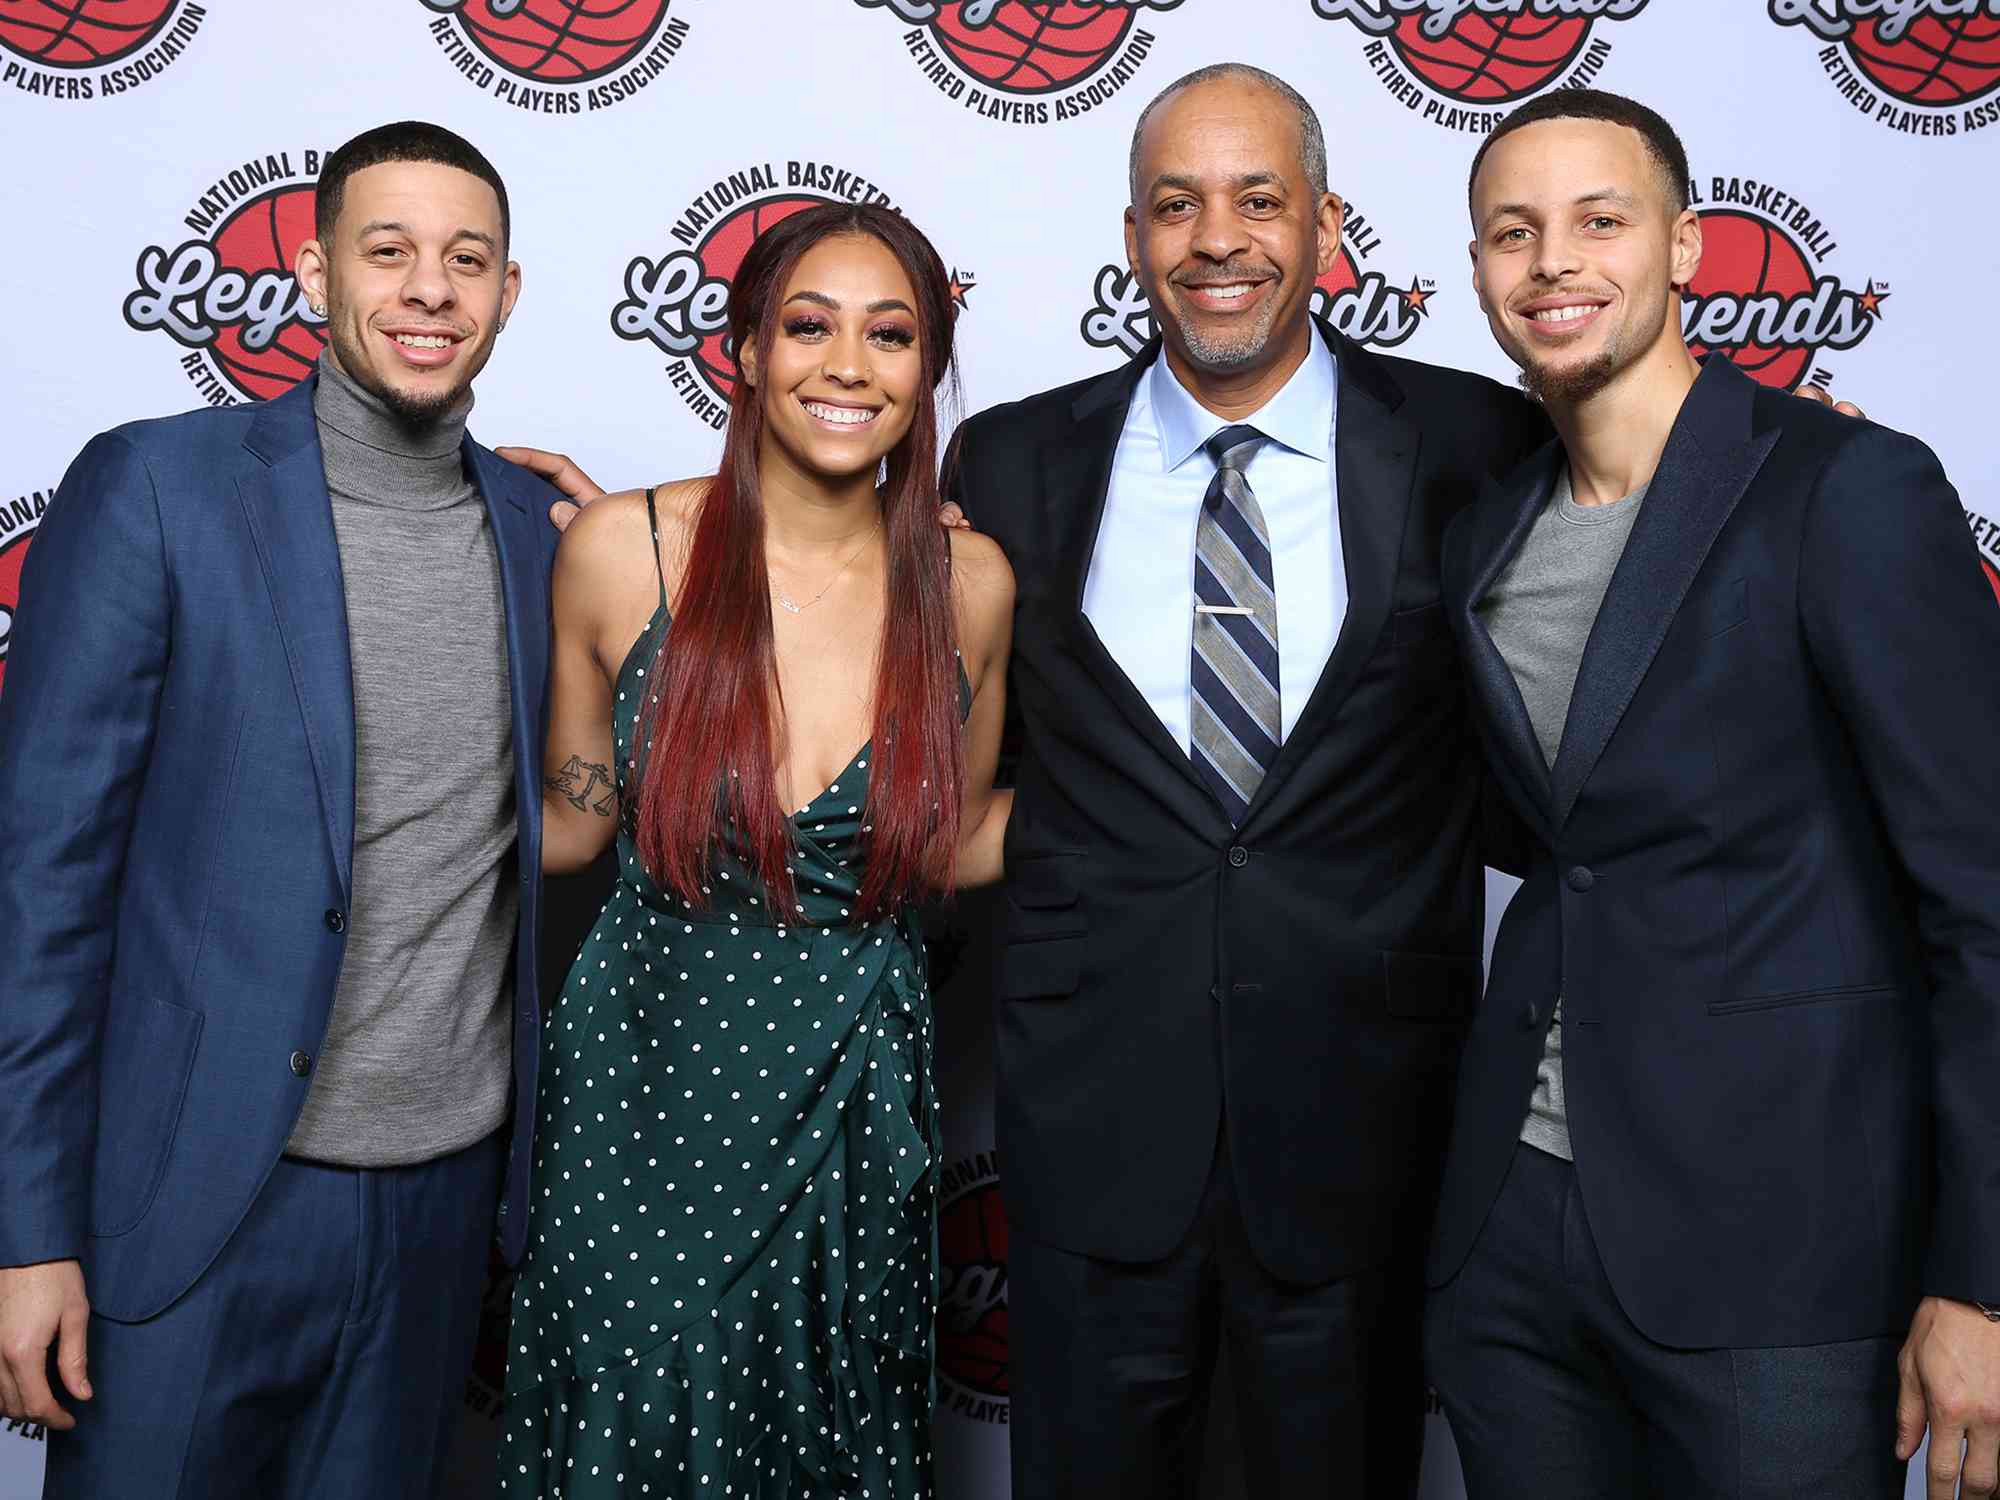 Seth Curry, Sydel Curry, Dell Curry and Stephen Curry pose for a portrait at the Legends Brunch during the 2019 NBA All-Star Weekend on February 17, 2019 at the Charlotte Convention Center in Charlotte, North Carolina